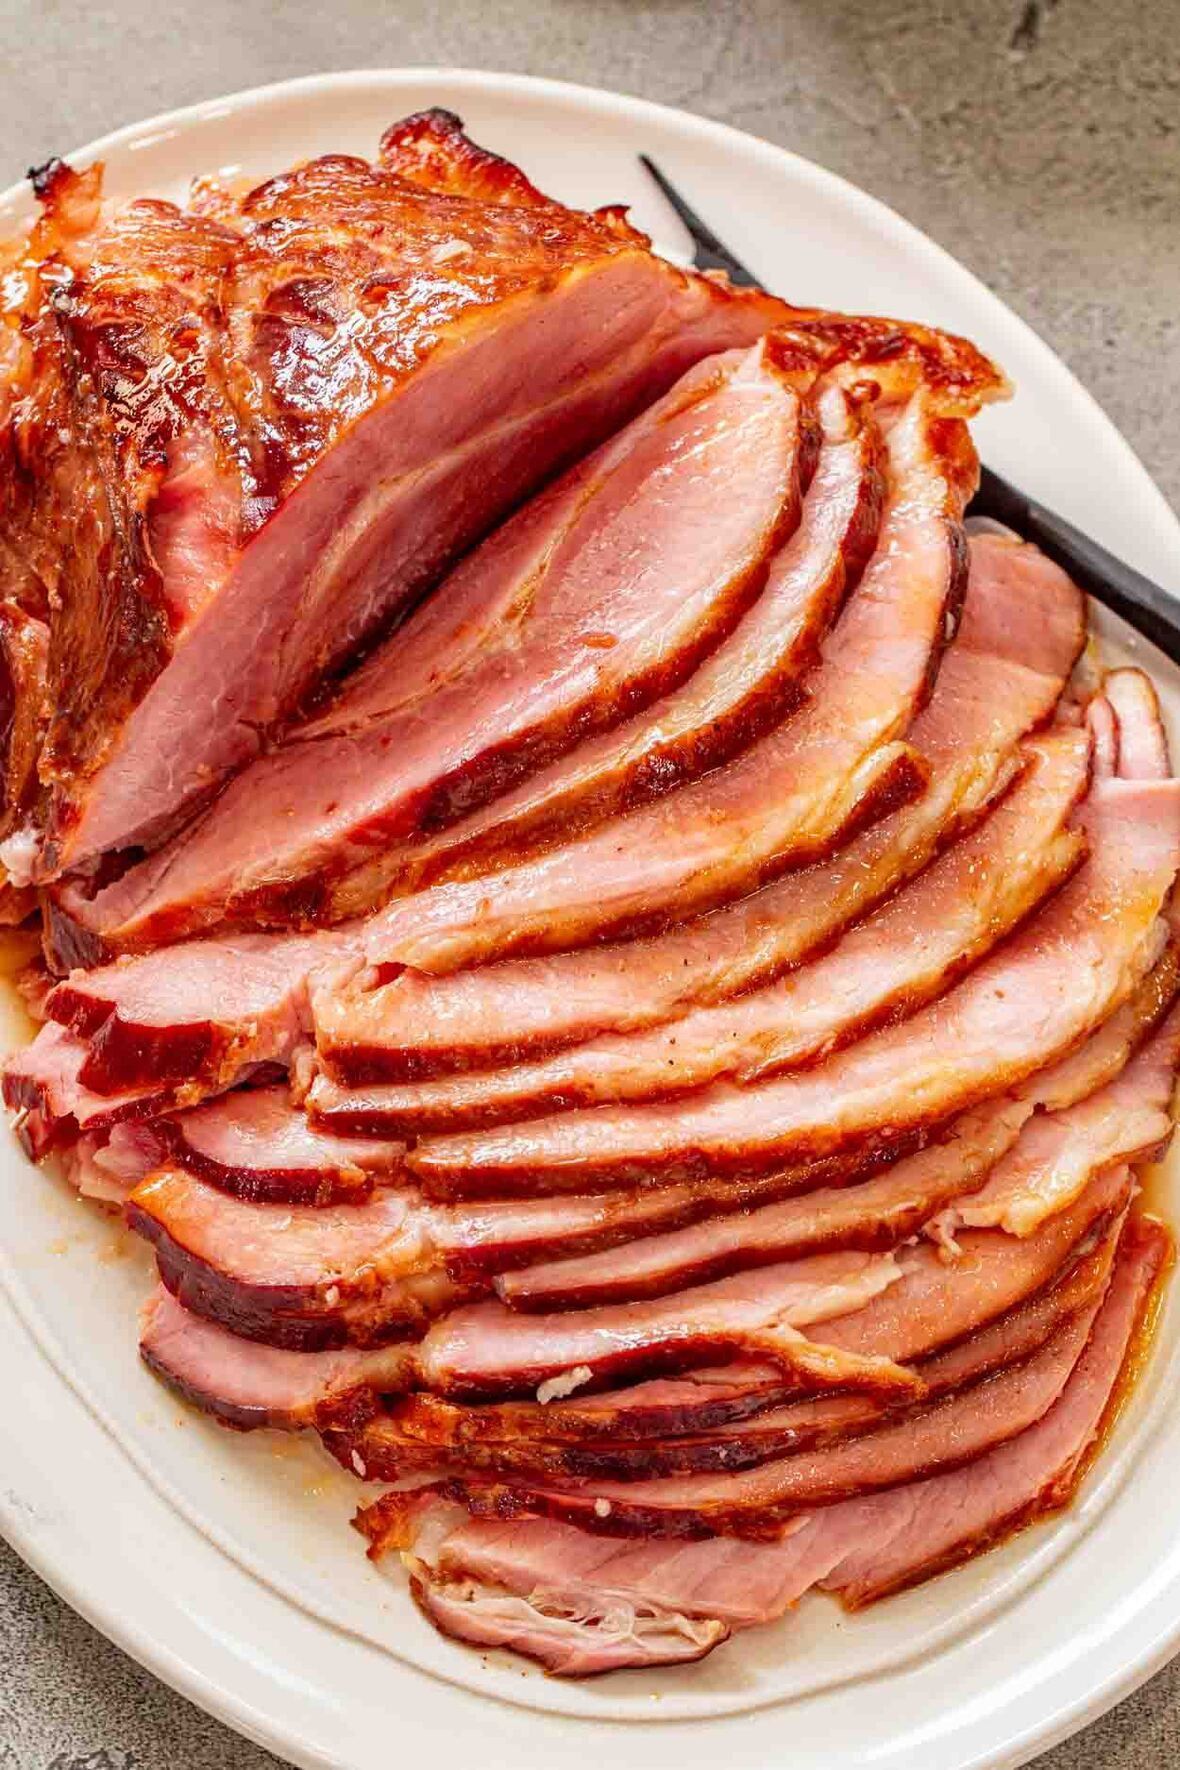 Honey Baked Ham Easter Specials
 You NEED to make this homemade Honey Baked Ham for Easter